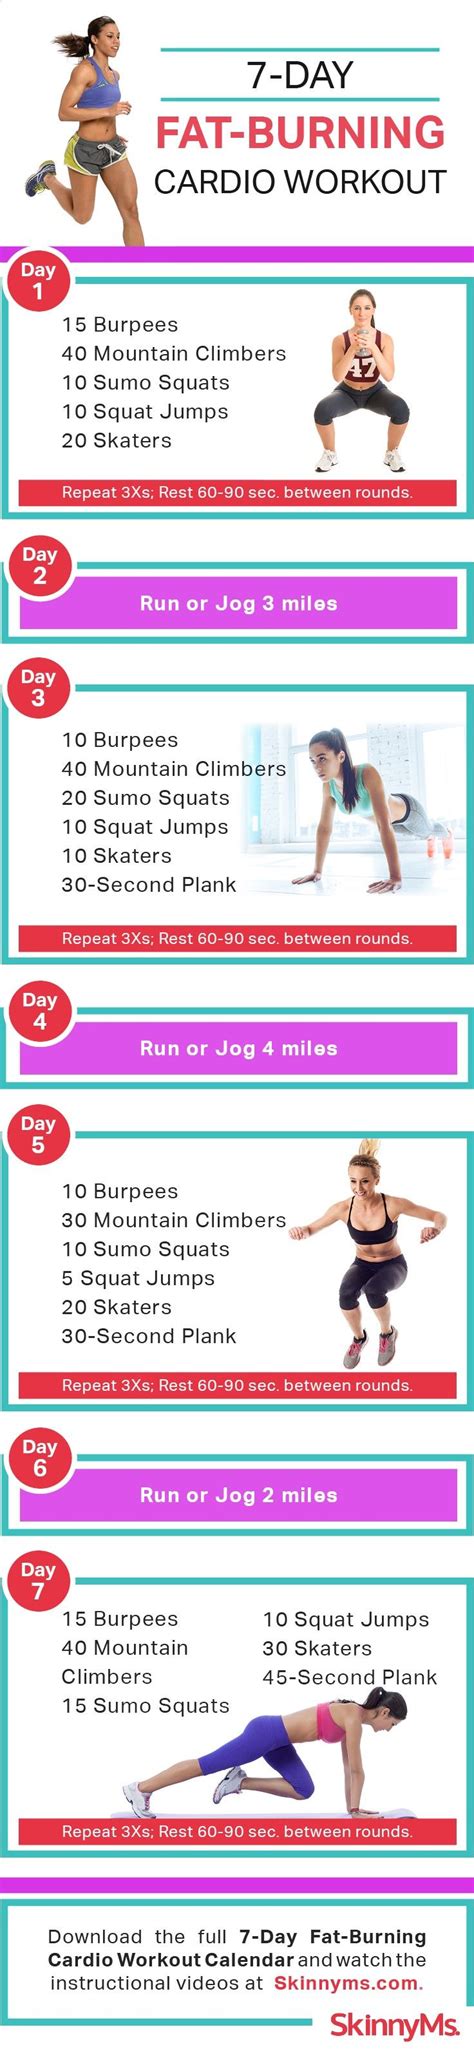 Does Hiit Or Cardio Burn More Fat Cardio Workout Exercises